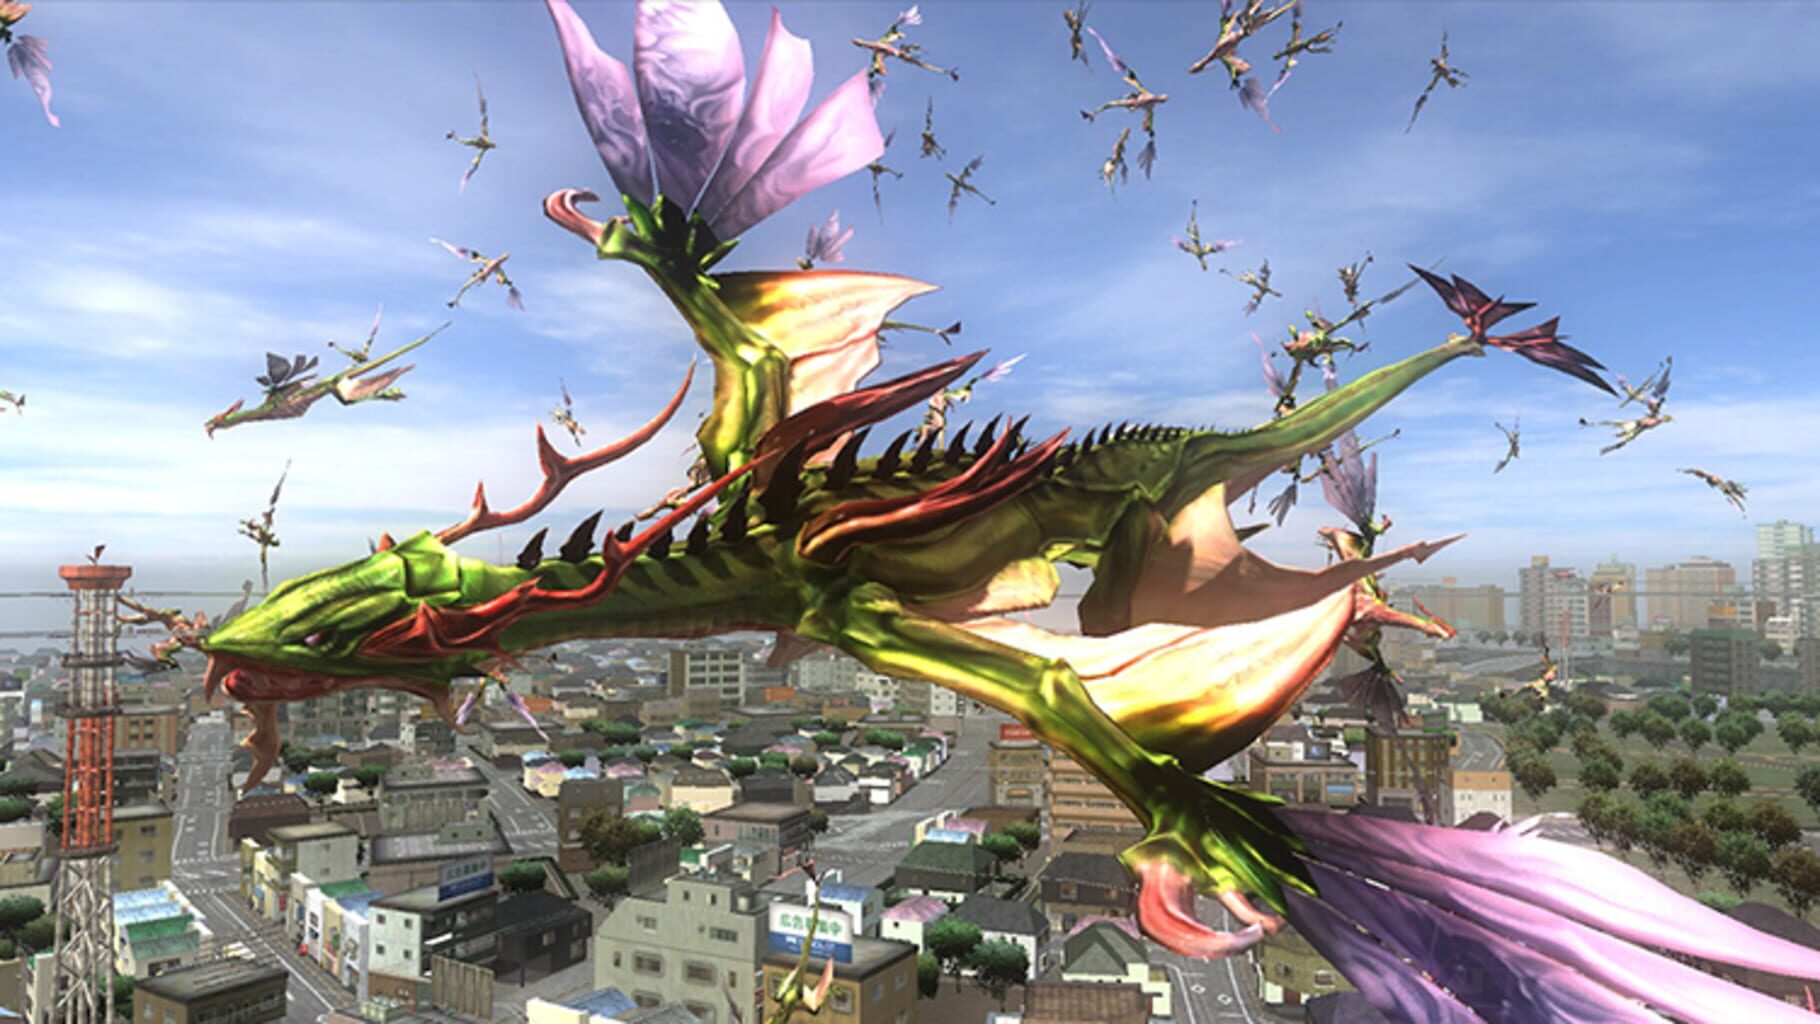 Earth Defense Force 4.1 for Nintendo Switch screenshot